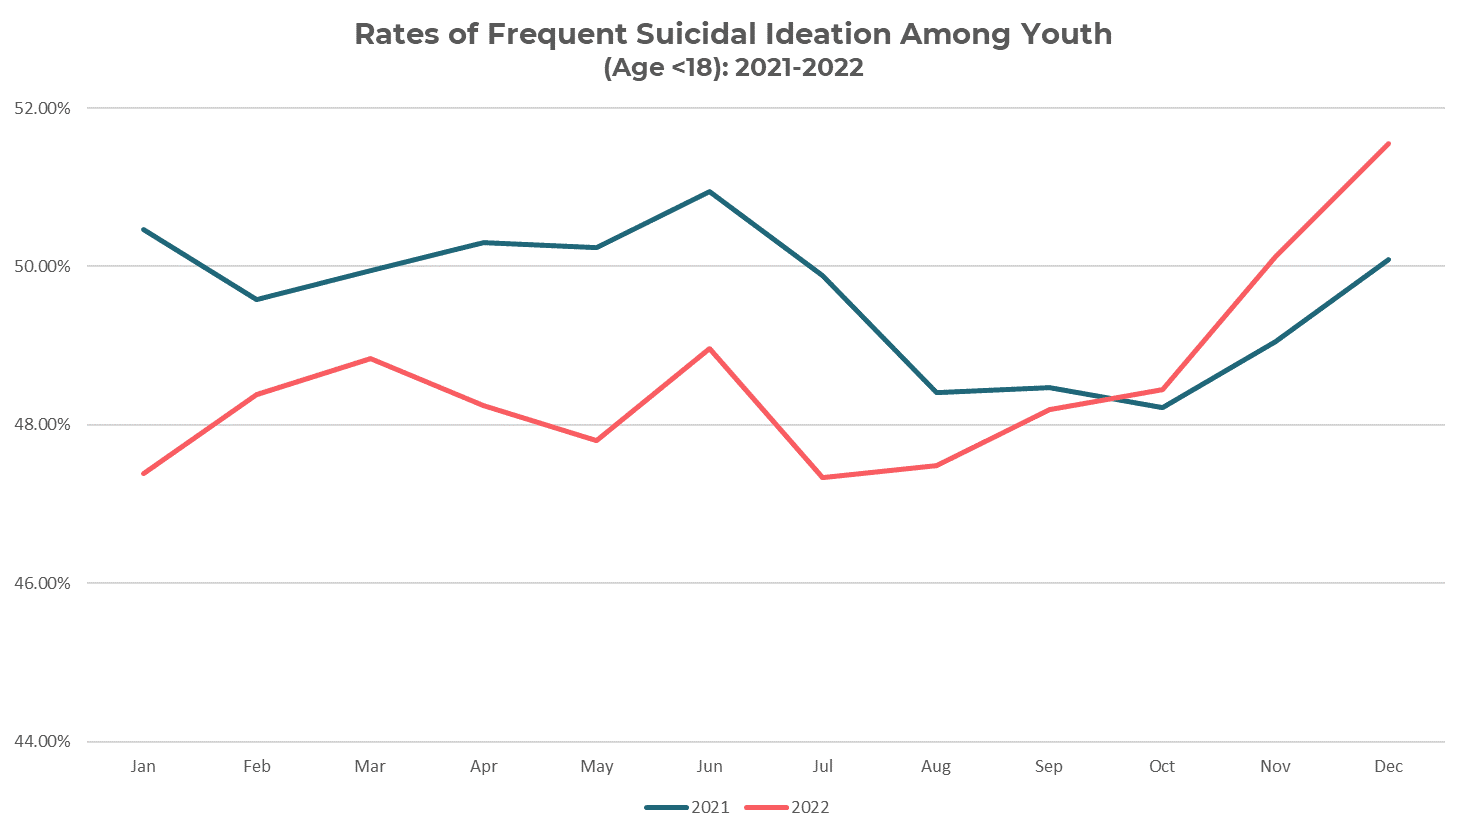 Line graph of rates of frequent suicidal ideation among screeners under 18 by month, years 2021-2022.